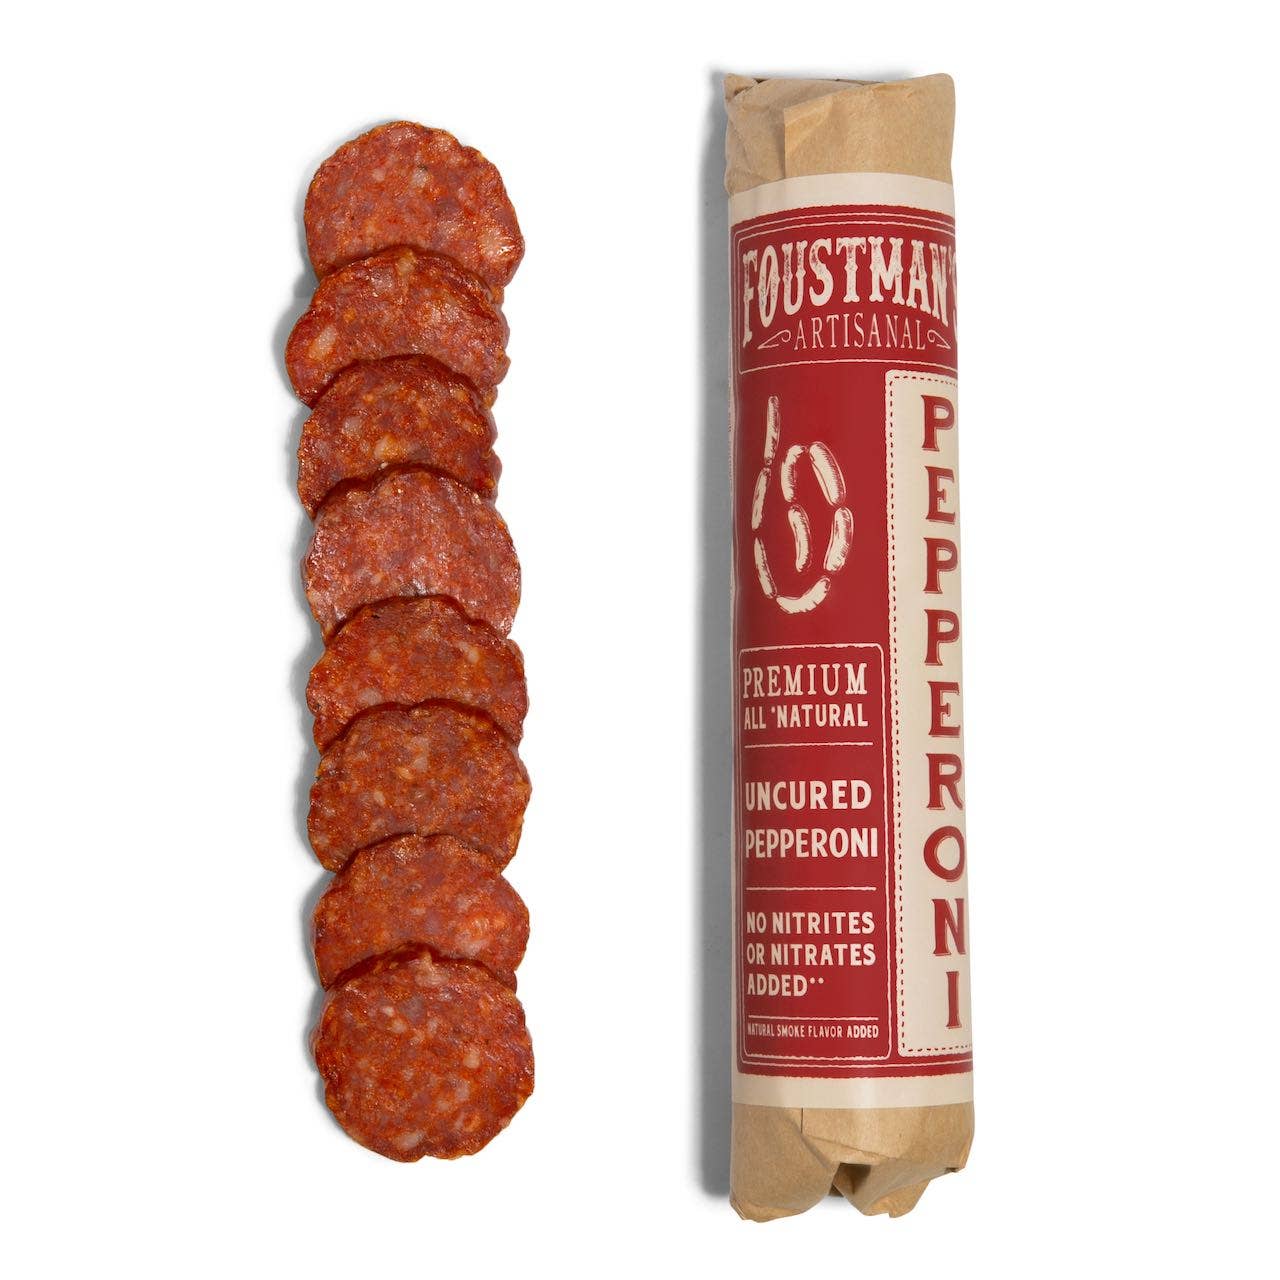 PEPPERONI | FOUSTMAN'S ALL-NATURAL UNCURED - 8oz